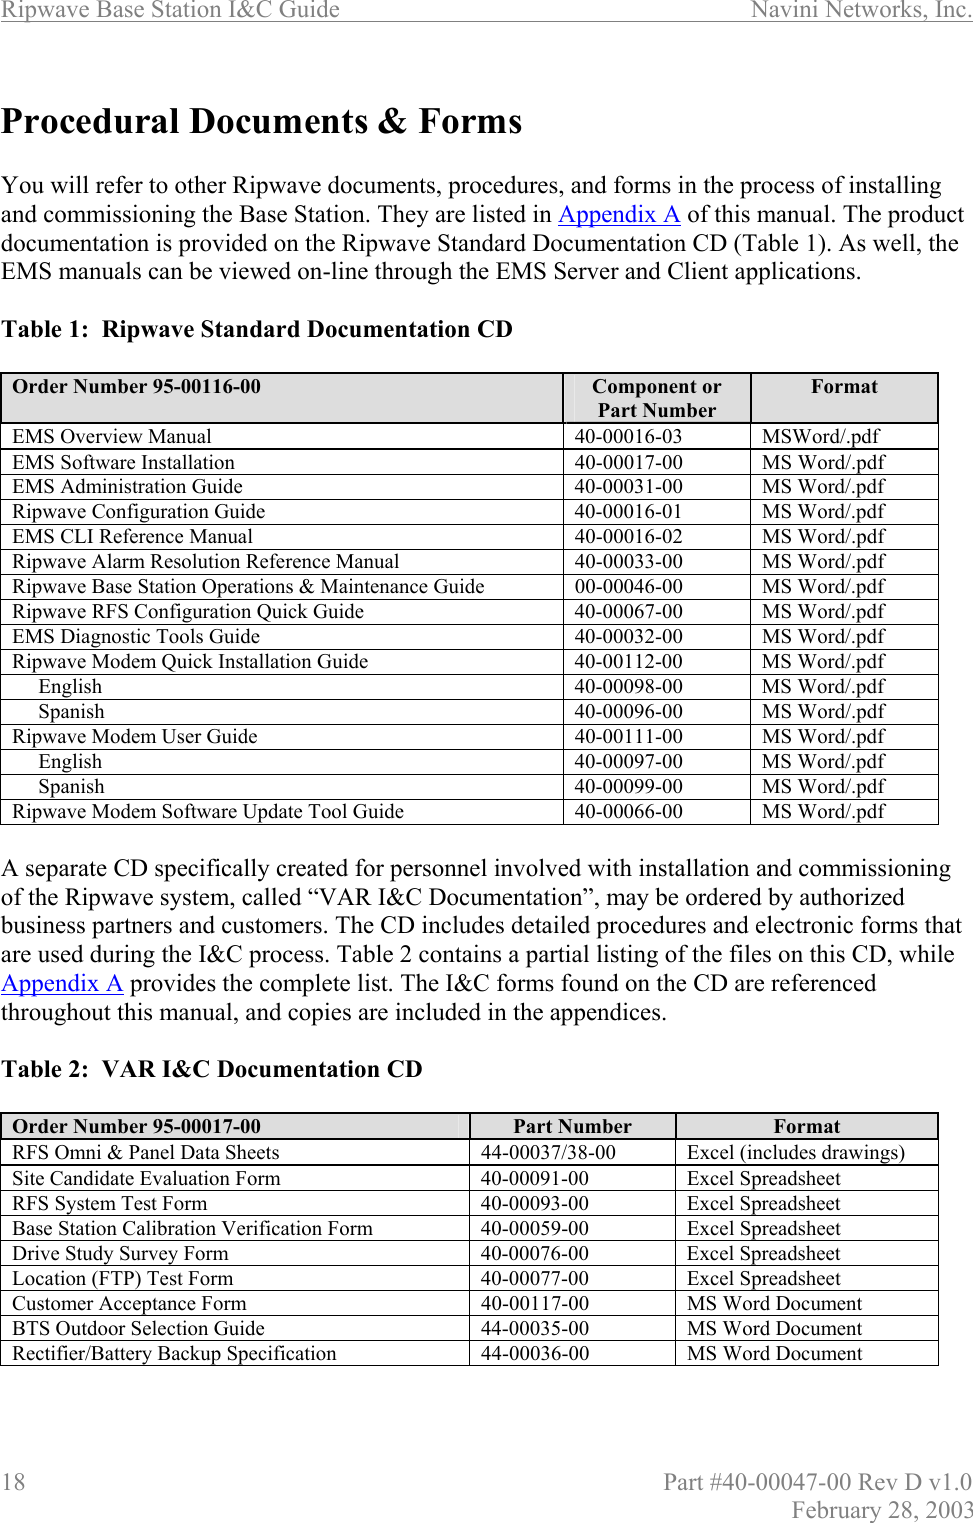 Ripwave Base Station I&amp;C Guide                      Navini Networks, Inc. 18                          Part #40-00047-00 Rev D v1.0 February 28, 2003  Procedural Documents &amp; Forms  You will refer to other Ripwave documents, procedures, and forms in the process of installing and commissioning the Base Station. They are listed in Appendix A of this manual. The product documentation is provided on the Ripwave Standard Documentation CD (Table 1). As well, the EMS manuals can be viewed on-line through the EMS Server and Client applications.  Table 1:  Ripwave Standard Documentation CD  Order Number 95-00116-00  Component or Part Number Format EMS Overview Manual  40-00016-03  MSWord/.pdf EMS Software Installation  40-00017-00  MS Word/.pdf EMS Administration Guide  40-00031-00  MS Word/.pdf Ripwave Configuration Guide  40-00016-01  MS Word/.pdf EMS CLI Reference Manual  40-00016-02  MS Word/.pdf Ripwave Alarm Resolution Reference Manual  40-00033-00  MS Word/.pdf Ripwave Base Station Operations &amp; Maintenance Guide  00-00046-00  MS Word/.pdf Ripwave RFS Configuration Quick Guide  40-00067-00  MS Word/.pdf EMS Diagnostic Tools Guide  40-00032-00  MS Word/.pdf Ripwave Modem Quick Installation Guide  40-00112-00  MS Word/.pdf      English  40-00098-00  MS Word/.pdf      Spanish  40-00096-00  MS Word/.pdf Ripwave Modem User Guide  40-00111-00  MS Word/.pdf      English  40-00097-00  MS Word/.pdf      Spanish  40-00099-00  MS Word/.pdf Ripwave Modem Software Update Tool Guide  40-00066-00  MS Word/.pdf  A separate CD specifically created for personnel involved with installation and commissioning of the Ripwave system, called “VAR I&amp;C Documentation”, may be ordered by authorized business partners and customers. The CD includes detailed procedures and electronic forms that are used during the I&amp;C process. Table 2 contains a partial listing of the files on this CD, while Appendix A provides the complete list. The I&amp;C forms found on the CD are referenced throughout this manual, and copies are included in the appendices.   Table 2:  VAR I&amp;C Documentation CD  Order Number 95-00017-00  Part Number  Format RFS Omni &amp; Panel Data Sheets  44-00037/38-00  Excel (includes drawings) Site Candidate Evaluation Form  40-00091-00  Excel Spreadsheet RFS System Test Form  40-00093-00  Excel Spreadsheet Base Station Calibration Verification Form  40-00059-00  Excel Spreadsheet Drive Study Survey Form  40-00076-00  Excel Spreadsheet Location (FTP) Test Form  40-00077-00  Excel Spreadsheet Customer Acceptance Form   40-00117-00  MS Word Document BTS Outdoor Selection Guide  44-00035-00  MS Word Document Rectifier/Battery Backup Specification  44-00036-00  MS Word Document  